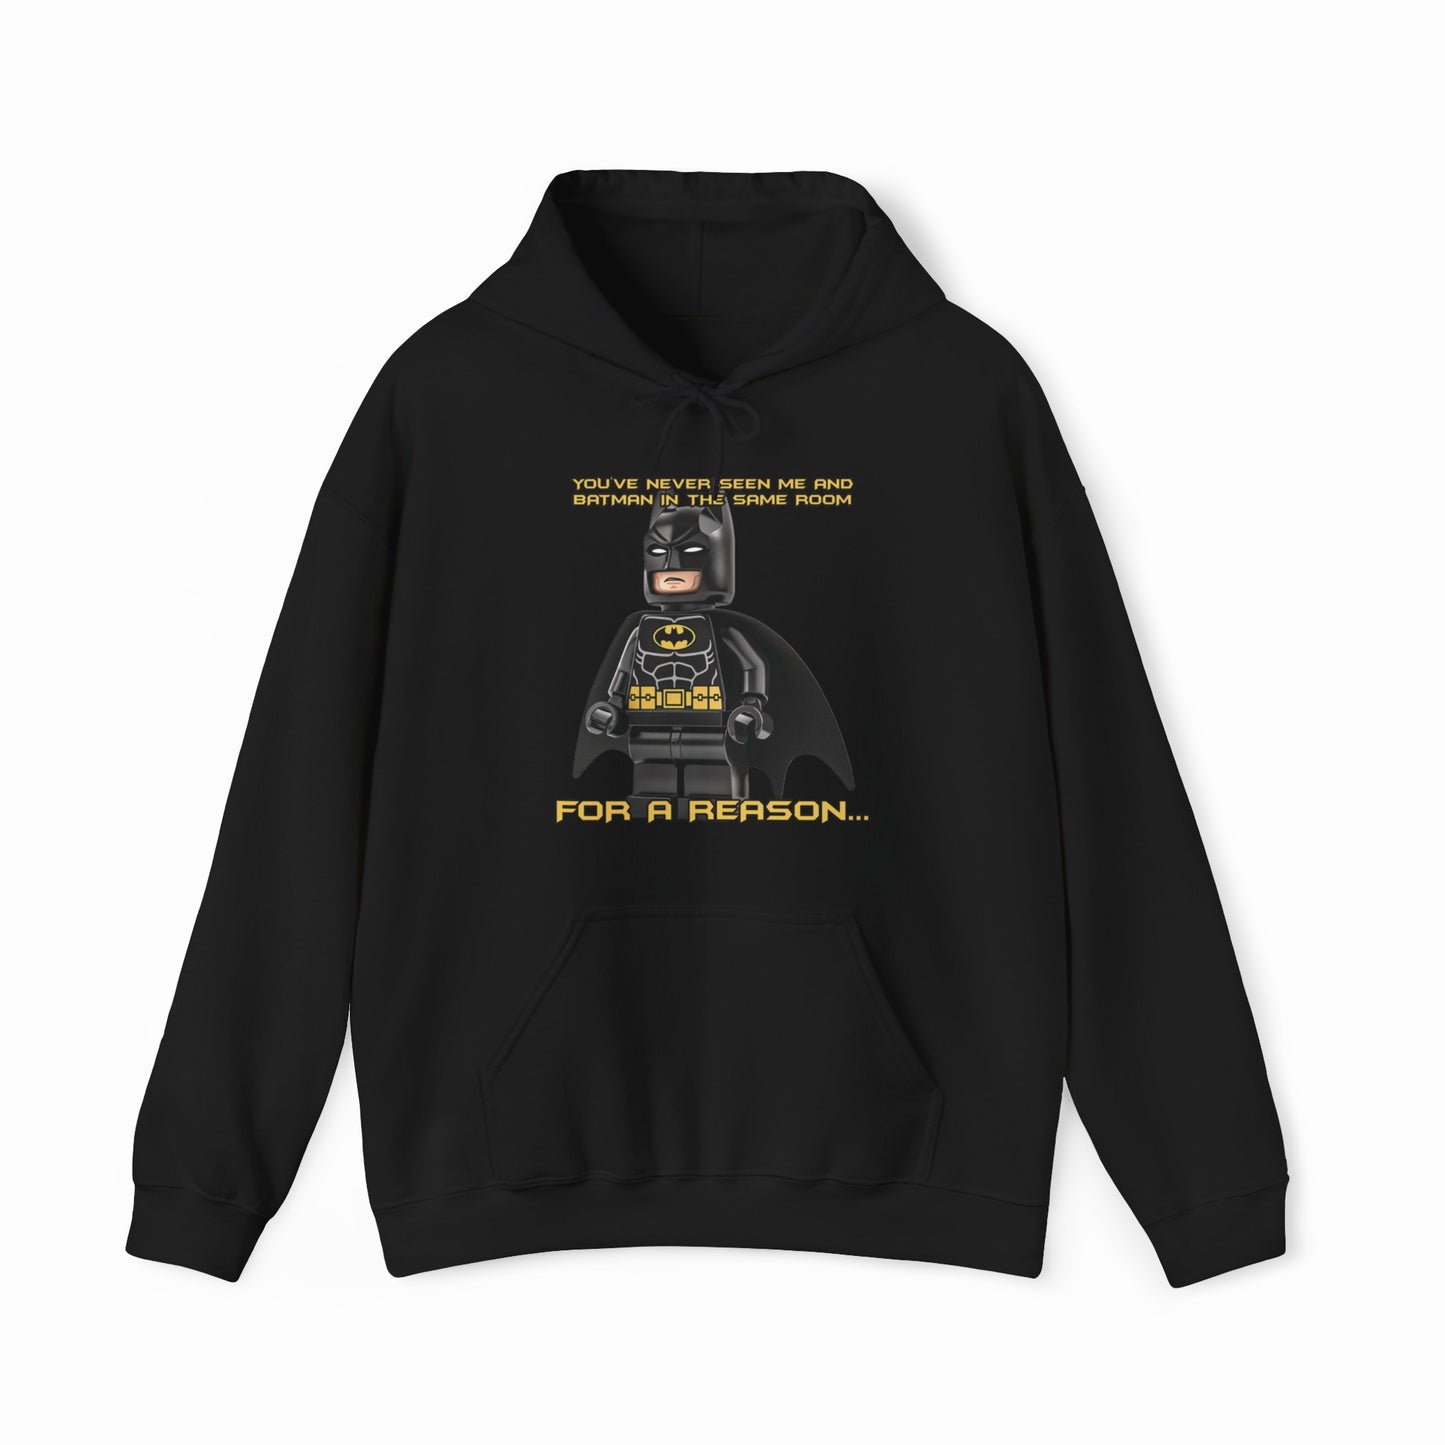 You've Never Seen Me And Batman In The Same Room For A Reason... Hoodie